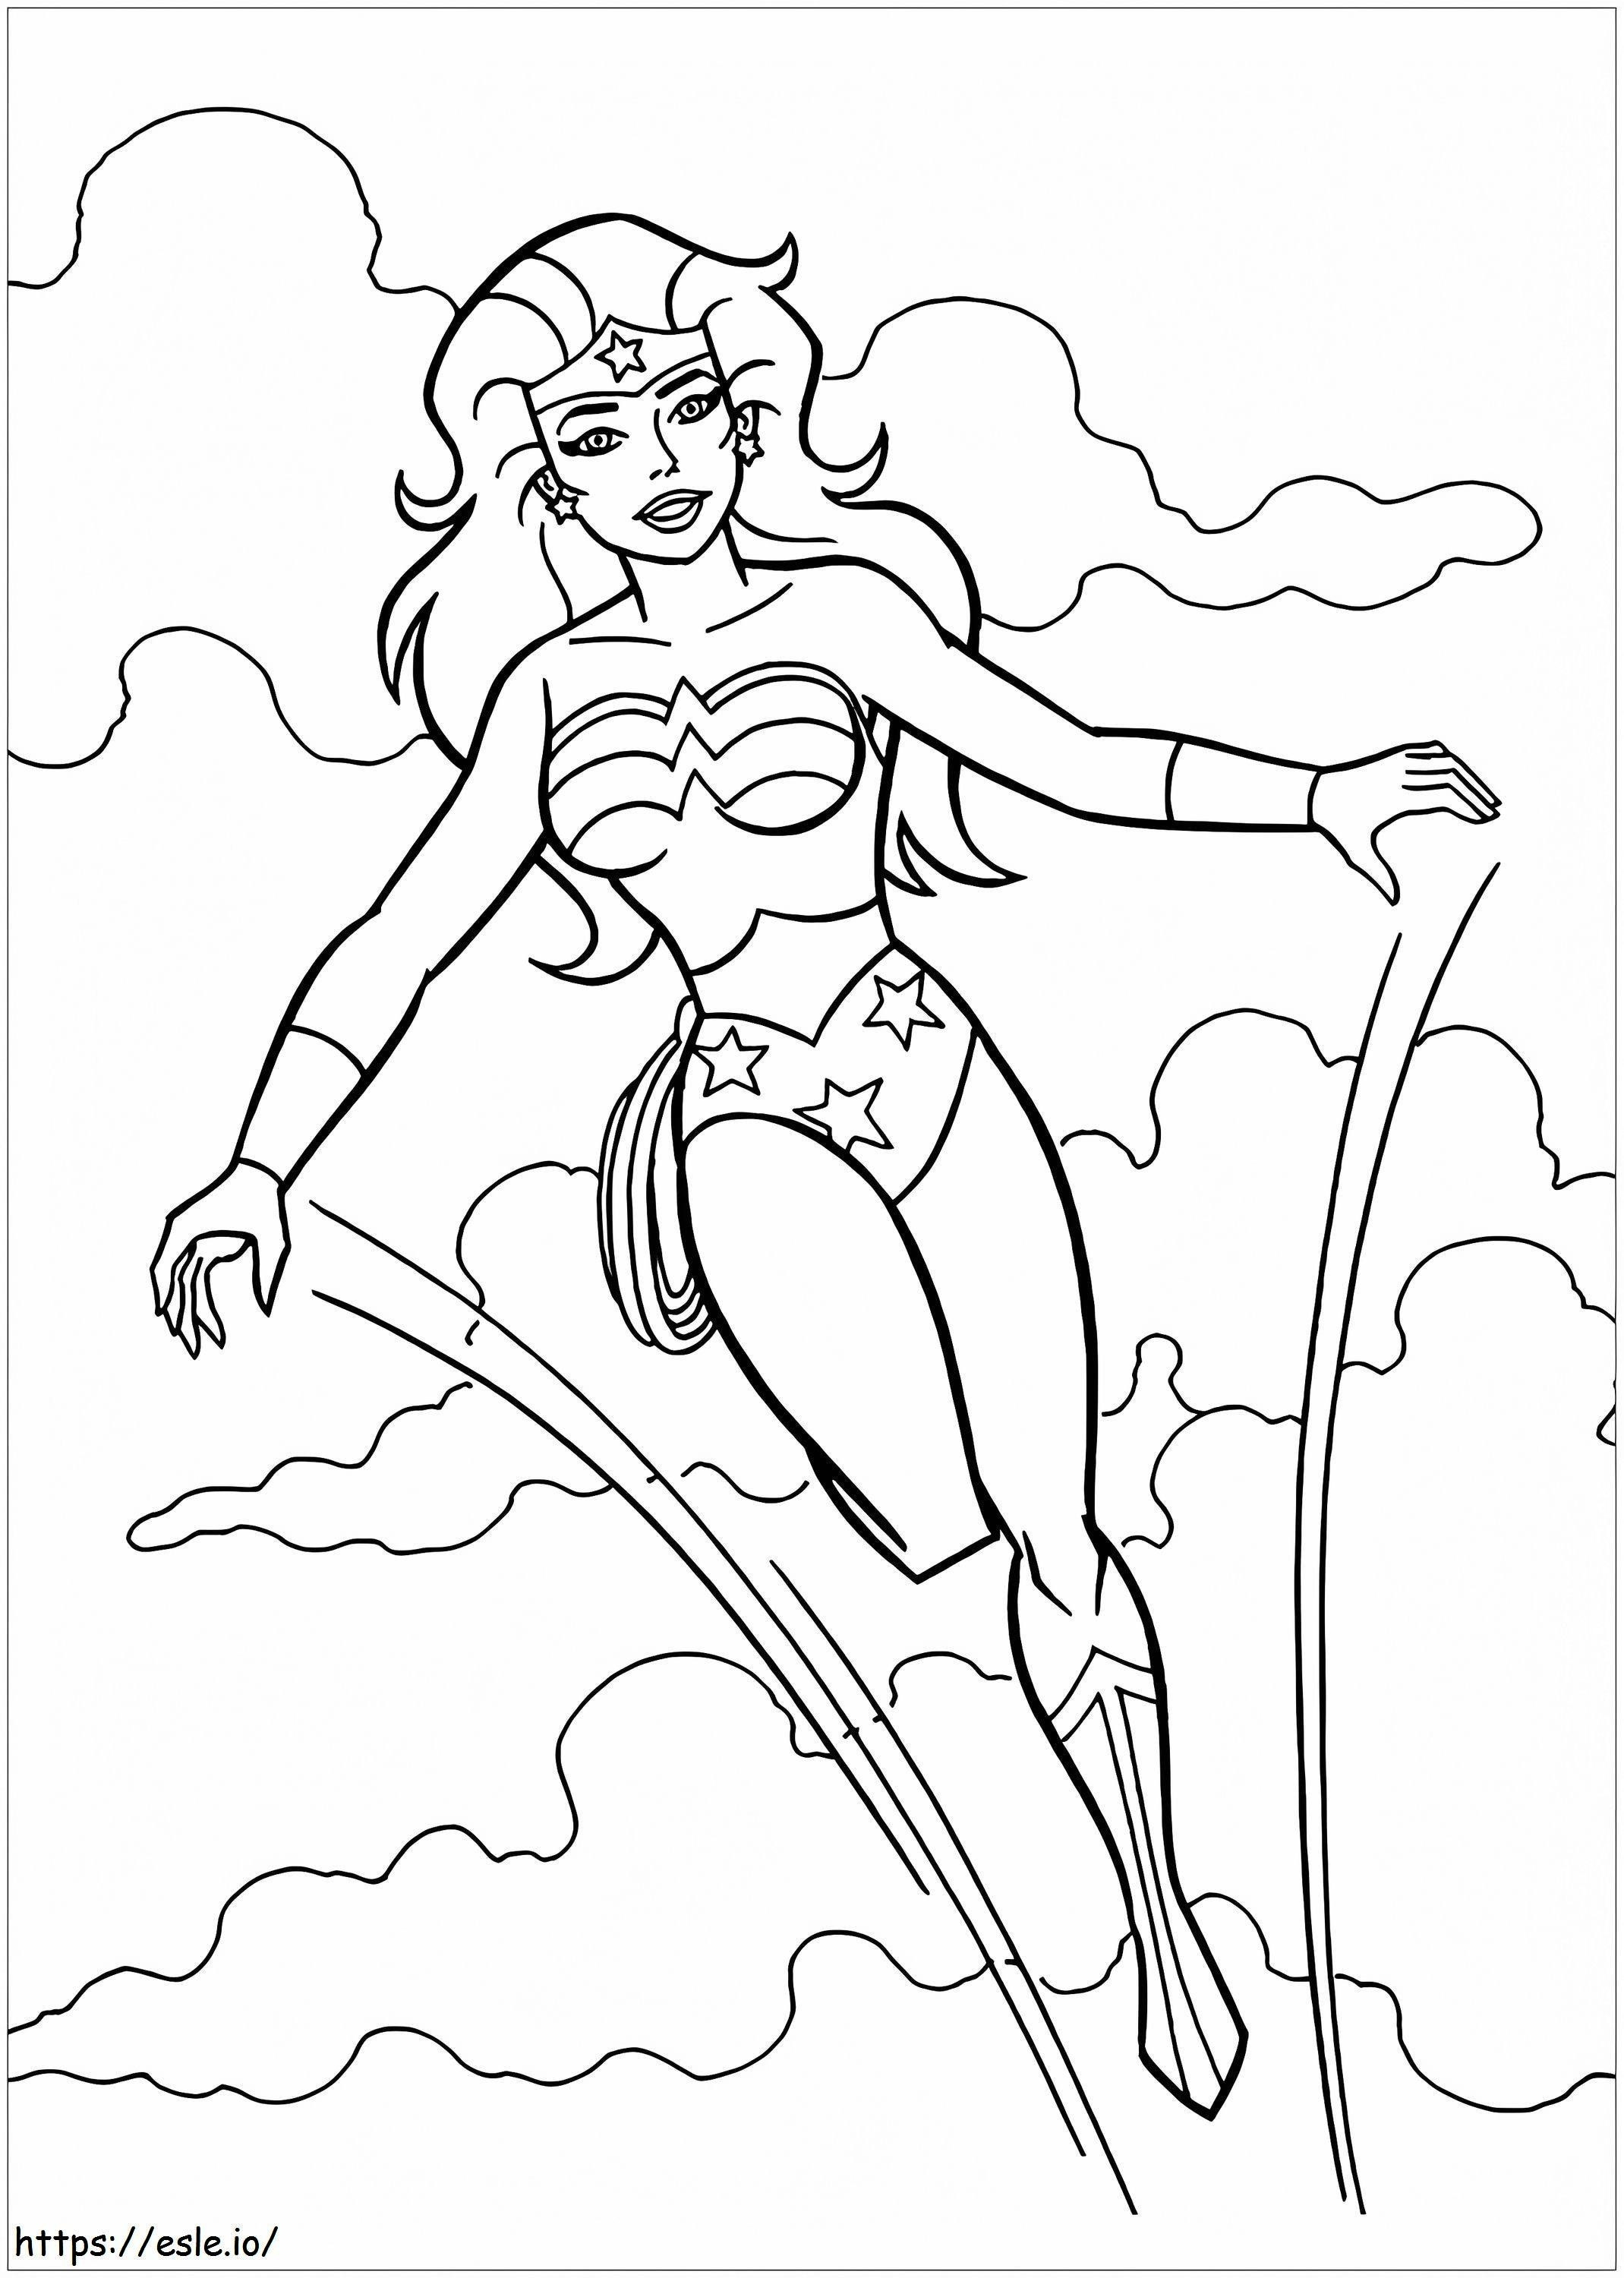 Coloring Pages For Children Wonder Woman 90448 1 coloring page